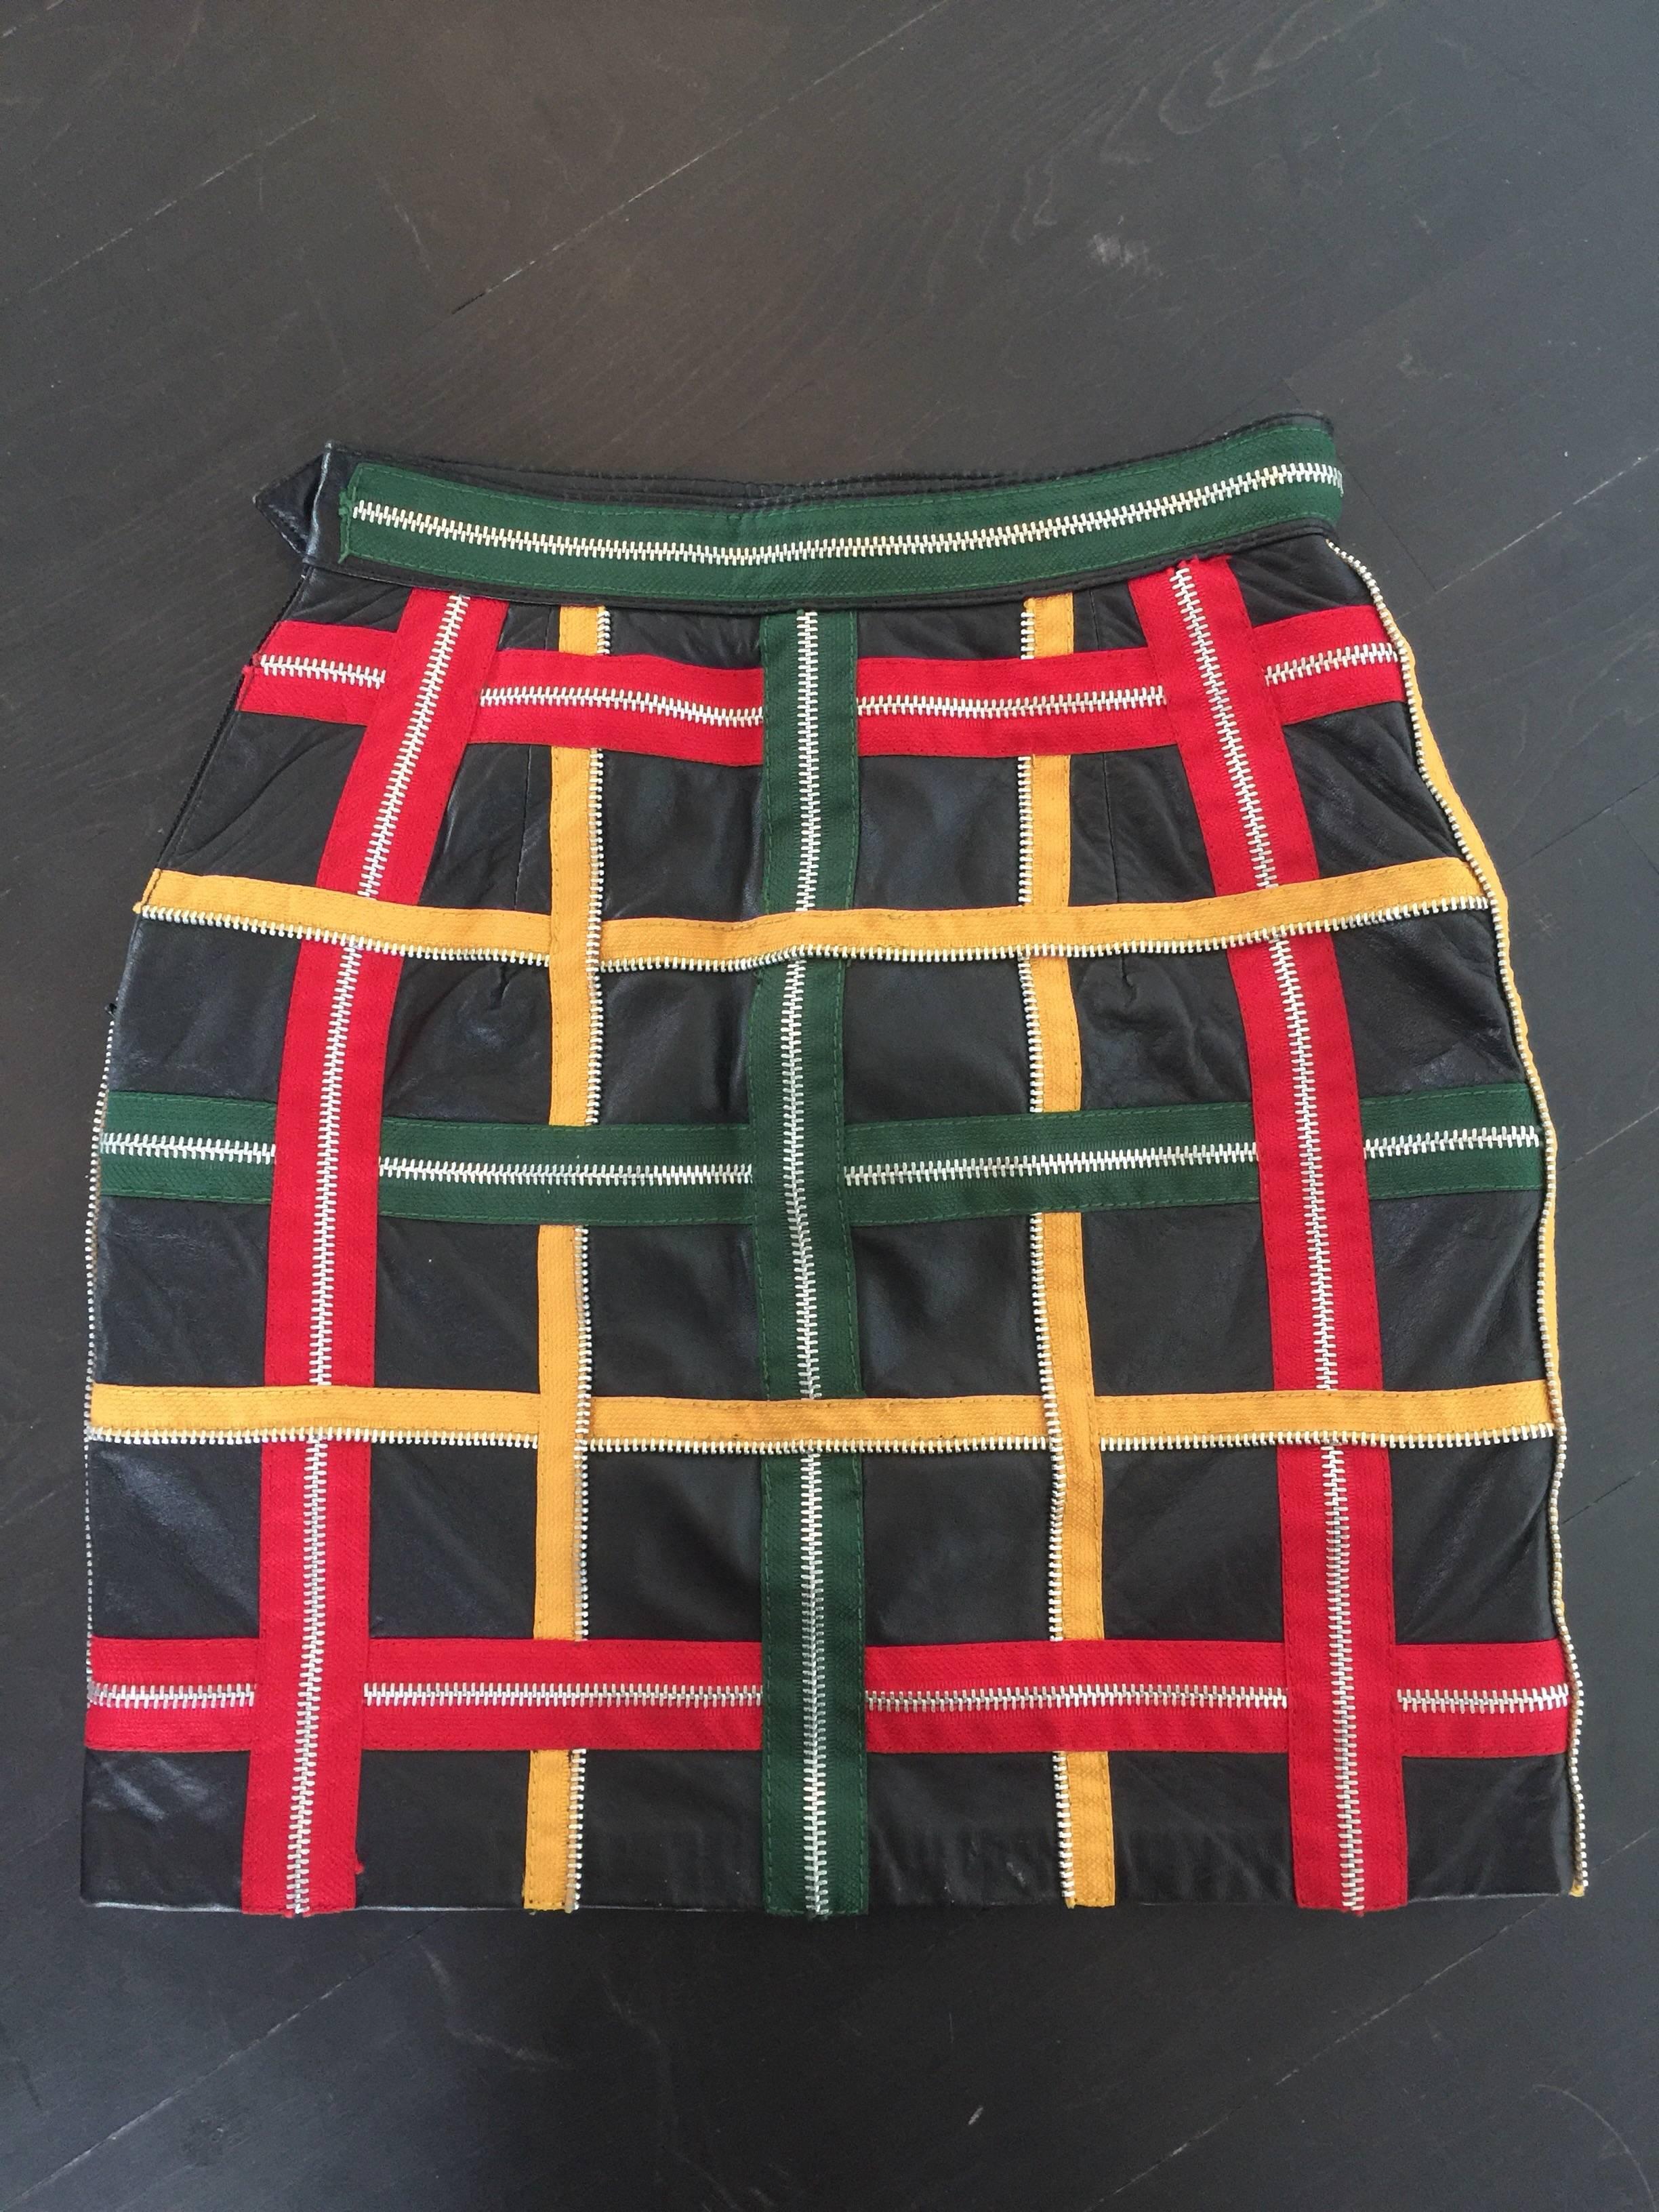 This mini skirt by Moschino is from the late 80's or early 90's. It is made of black leather with an overlay of red, green and yellow zippers. The zipper details have silver hardware and criss cross to form a plaid pattern. The skirt is fully lined